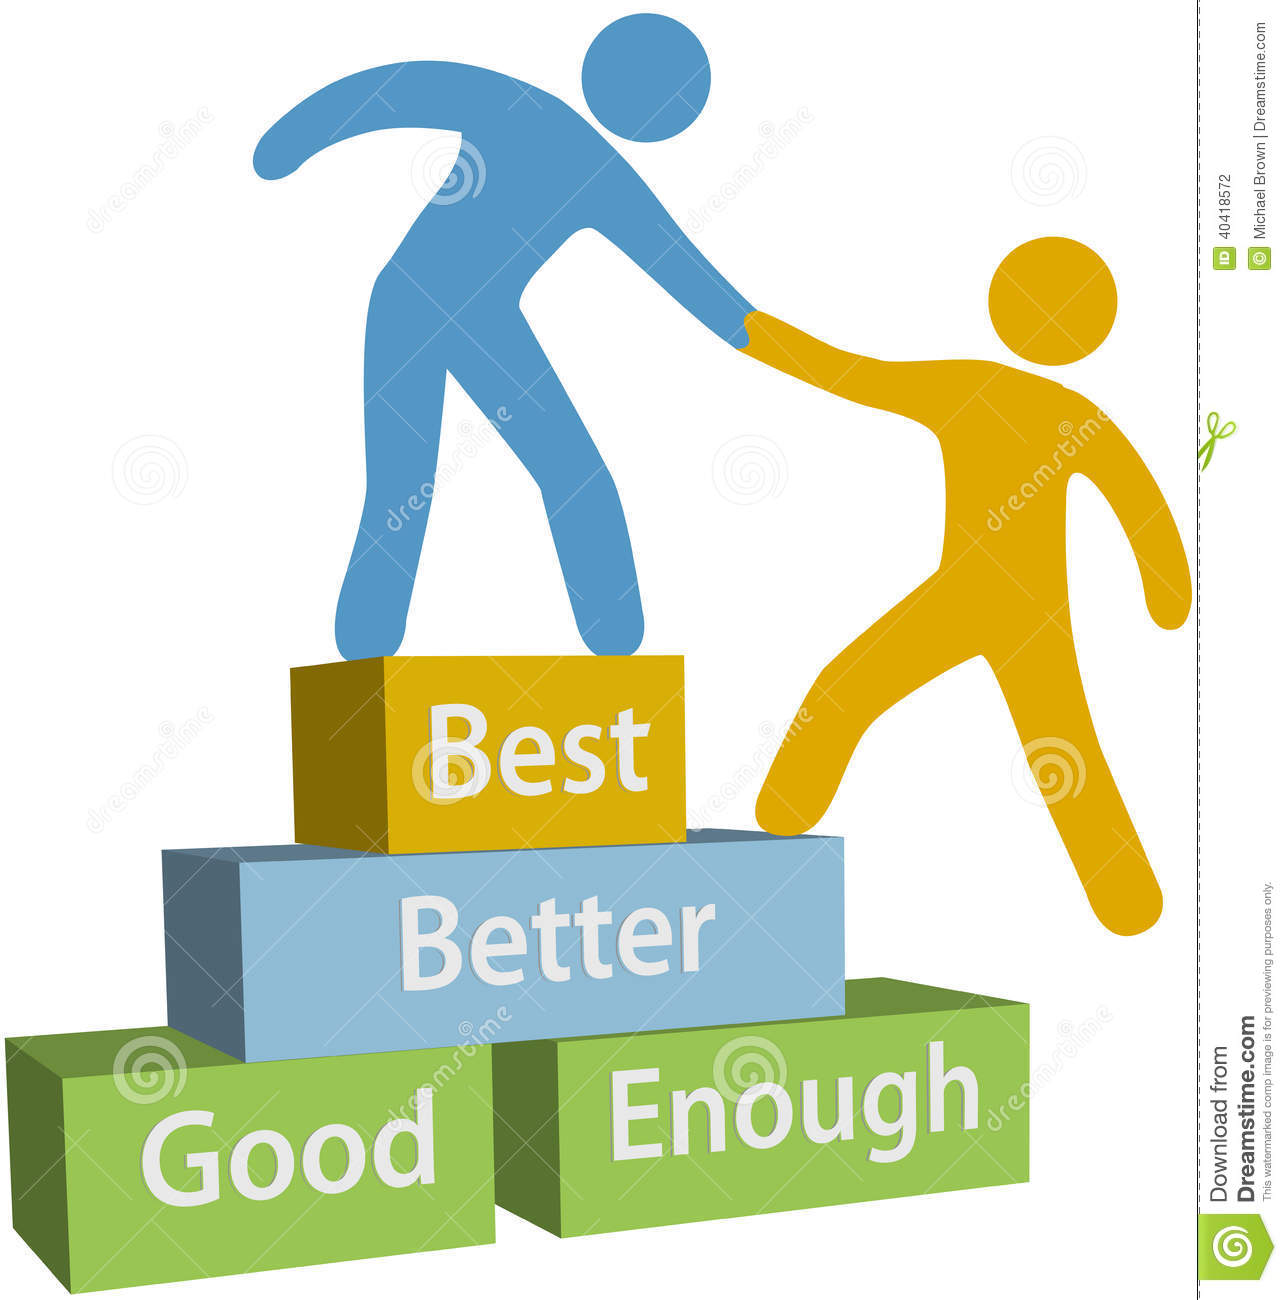     Person Achieve Good Enough Better And Best Improvement On Evaluation